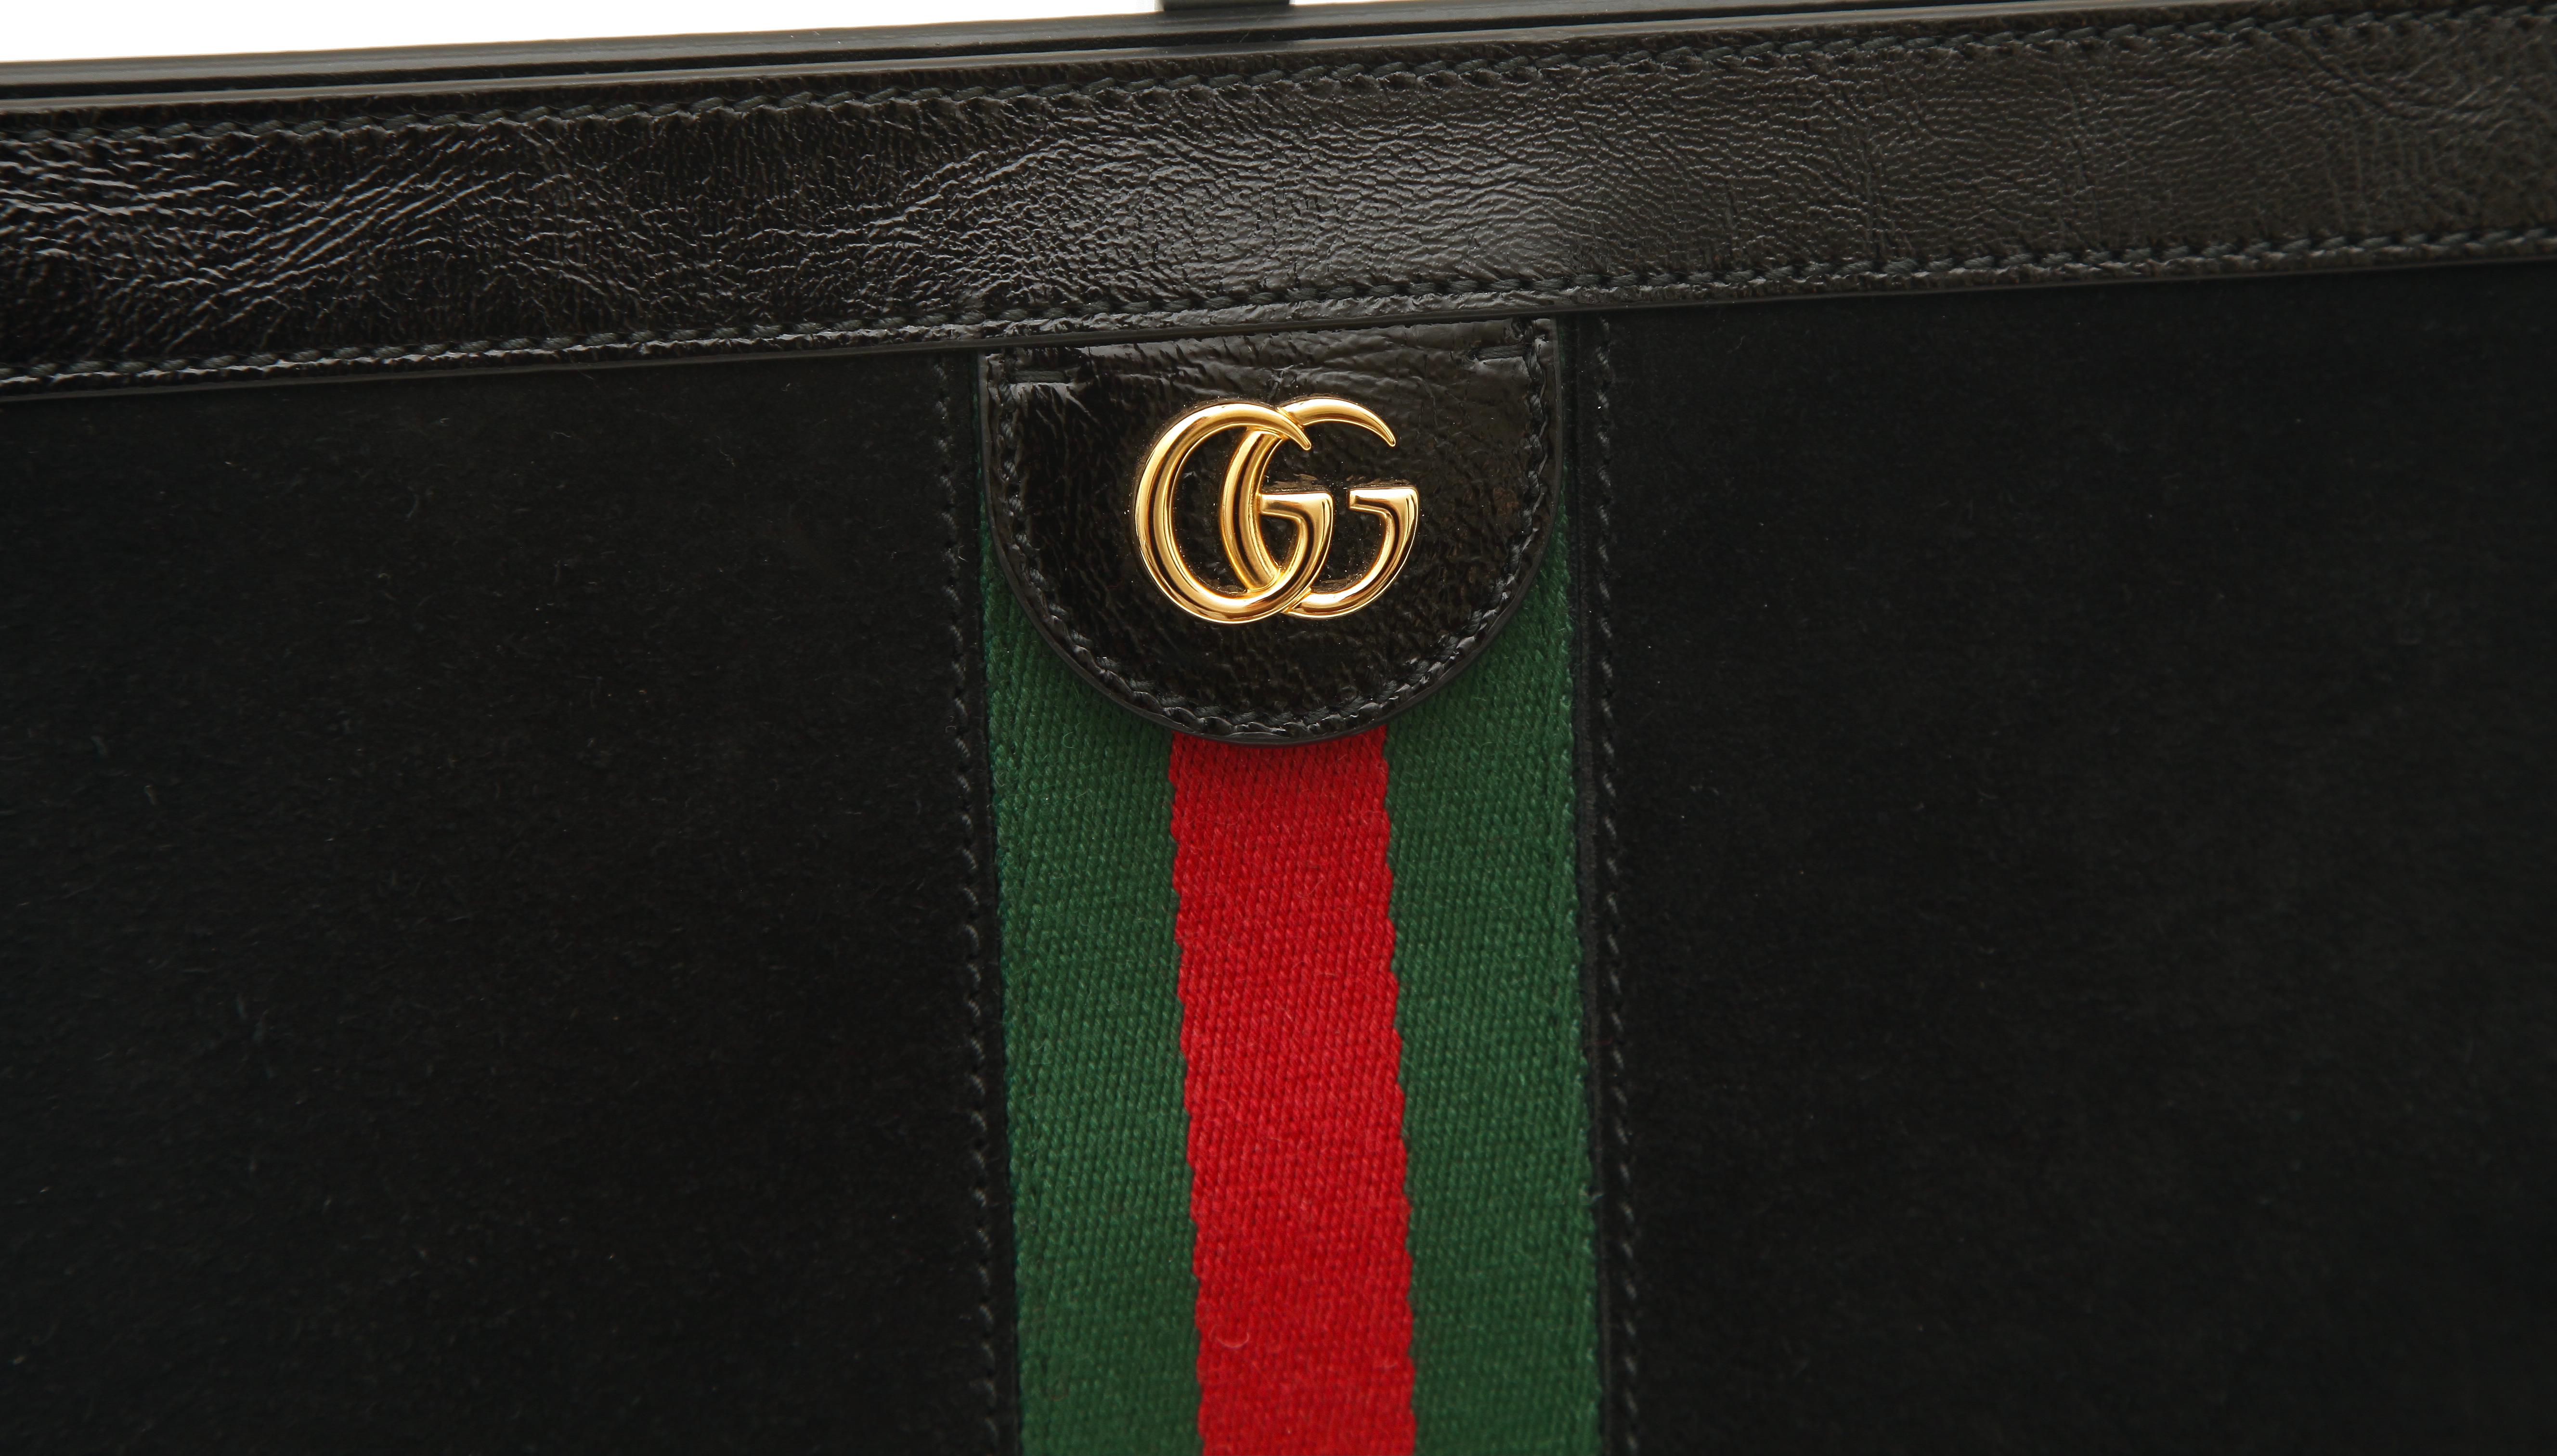 GUARANTEED AUTHENTIC GUCCI BLACK SUEDE MEDIUM OPHIDIA CHAIN SHOULDER BAG

Design:
- Black suede leather upper.
- Green and red web stripe.
- Gold-tone GG logo.
- Magnetic top frame closure.
- Gold-tone metal chain shoulder strap.
- Two main interior